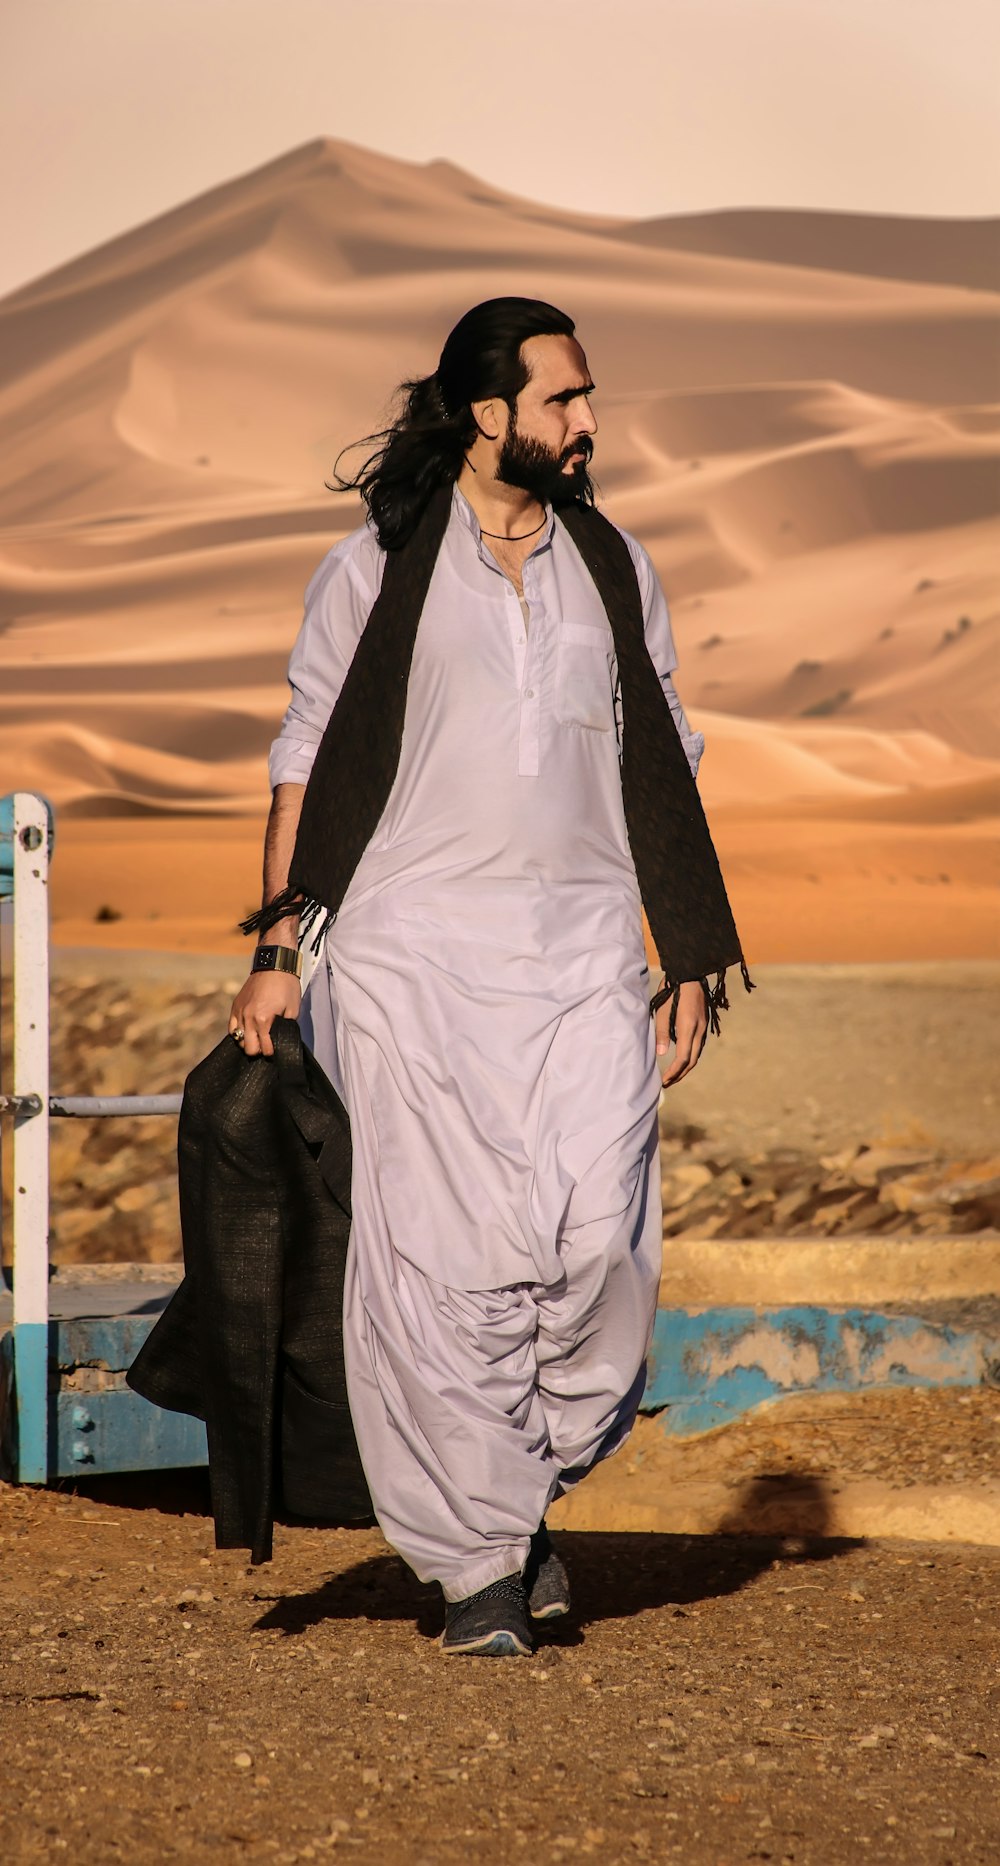 a man with long hair and a beard walking in the desert